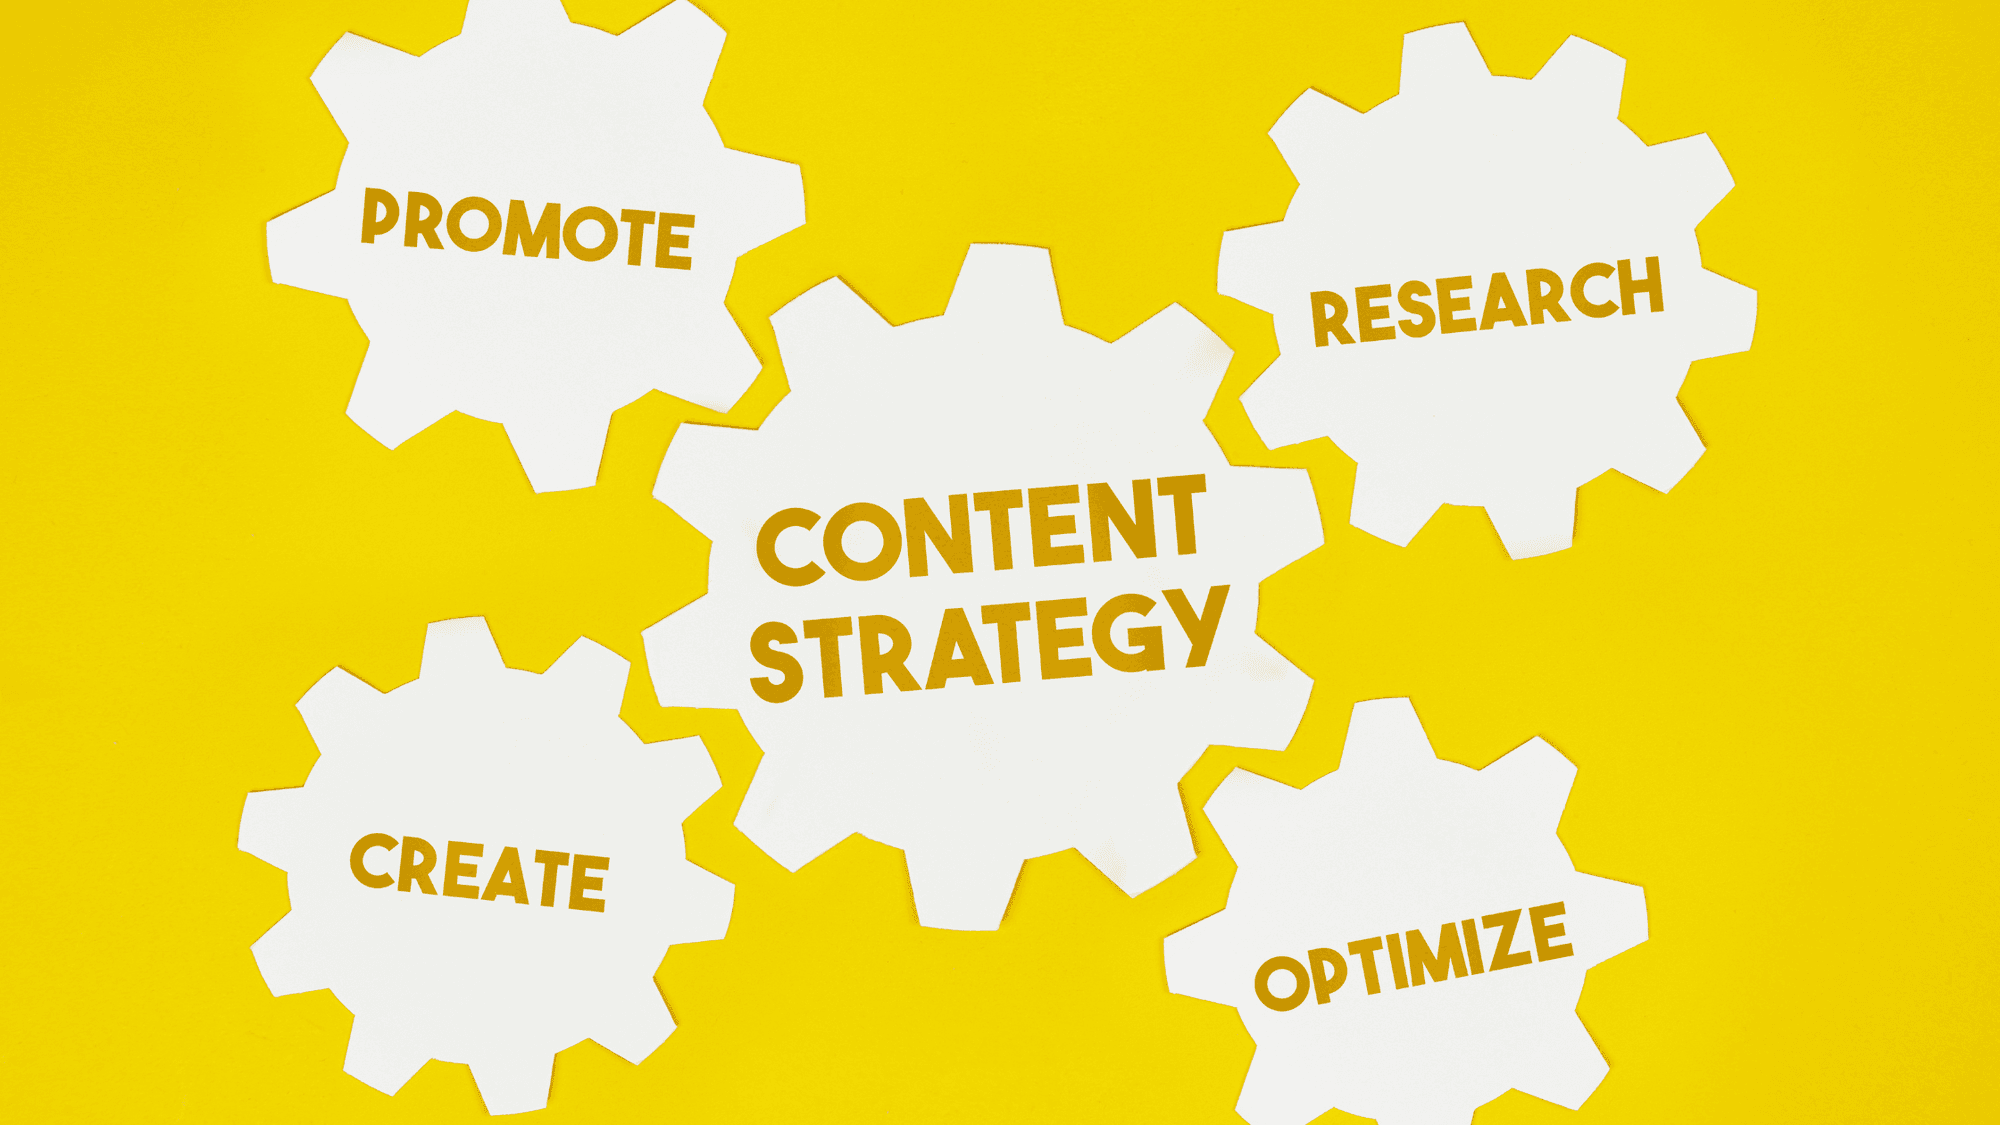 Creative Content Ideas For Your Website